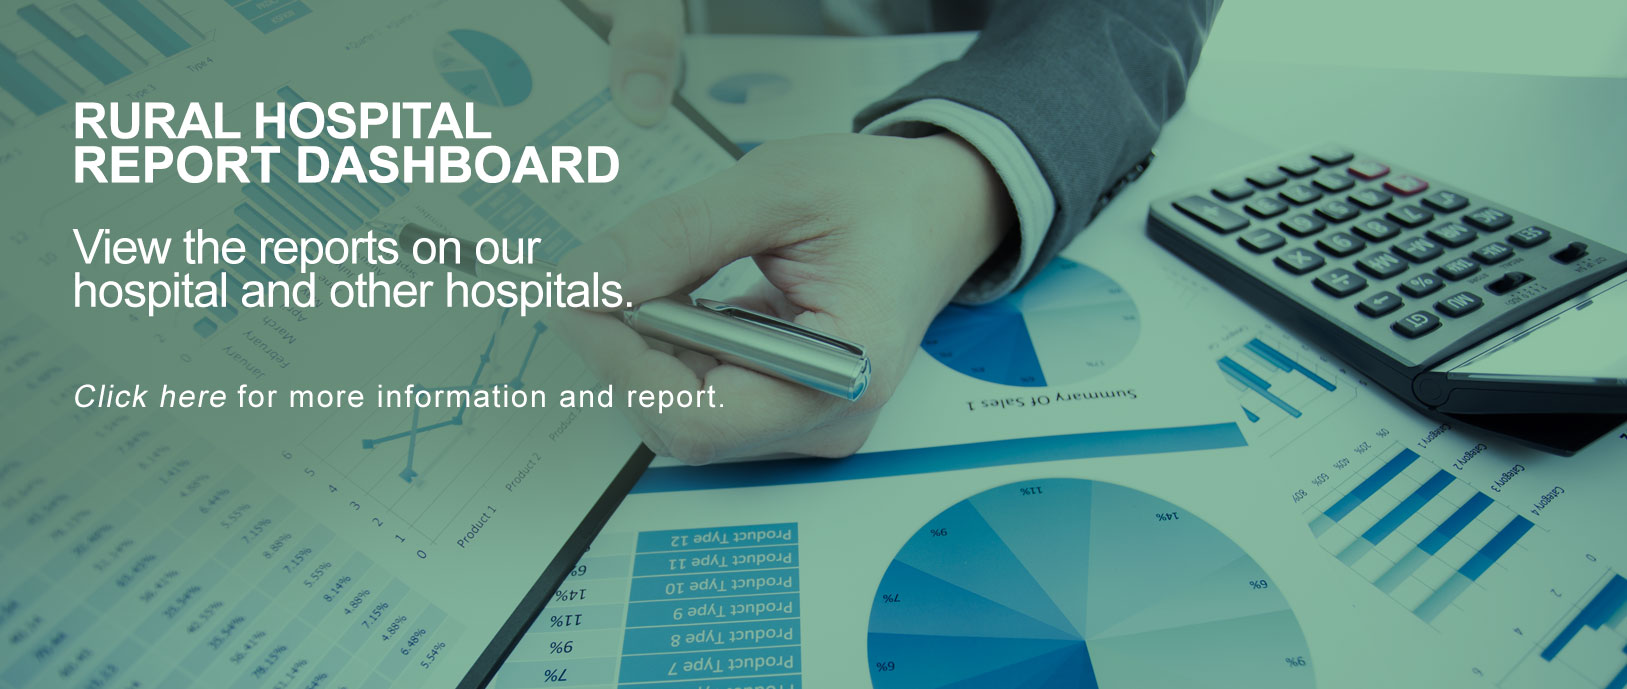 RURAL HOSPITAL 
REPORT DASHBOARD
View the reports on our hospital and other hospitals.
Click here for more information and report.